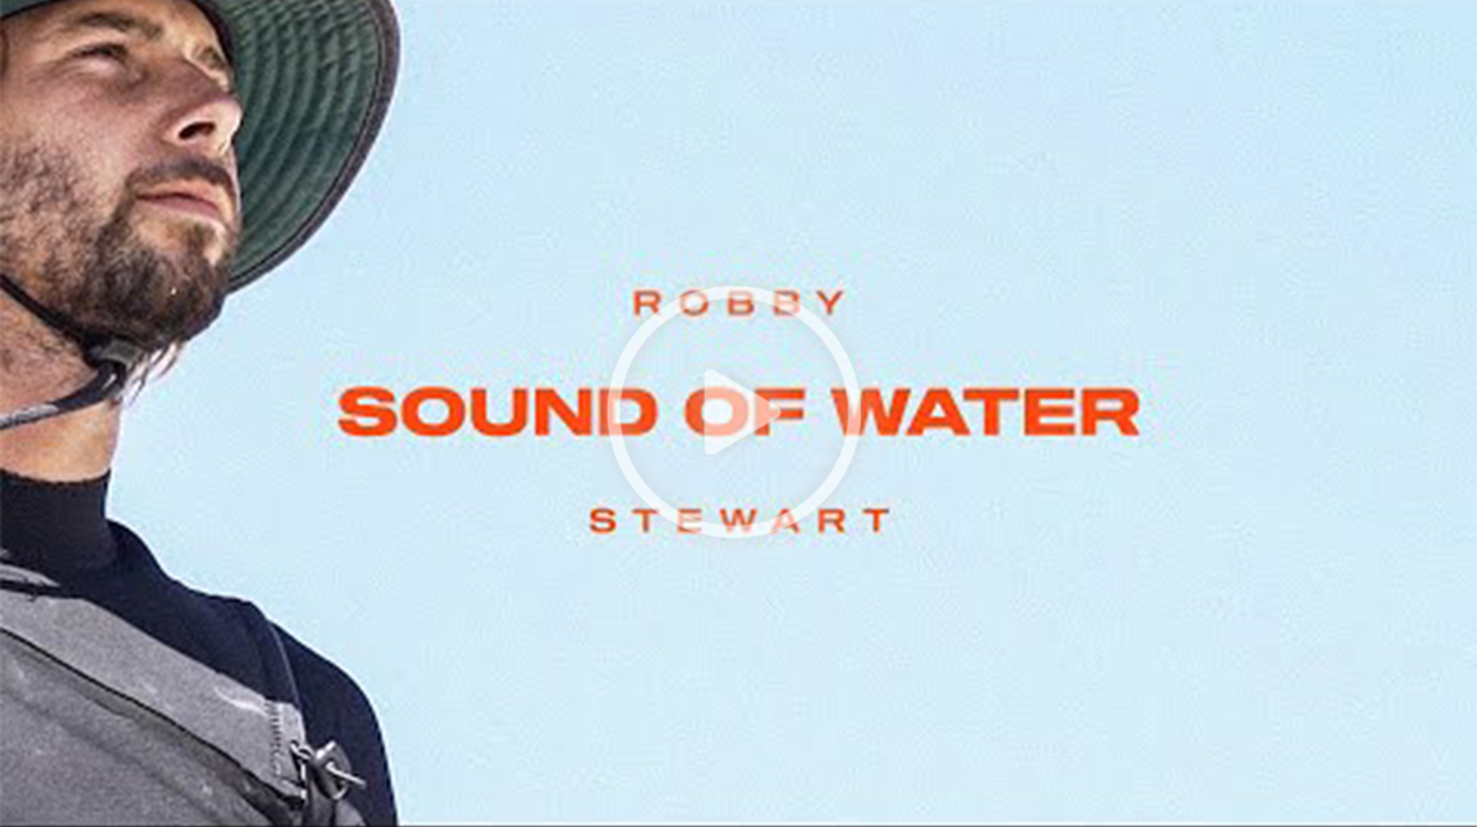 robby - Robby Stewart in "Sound of Water"